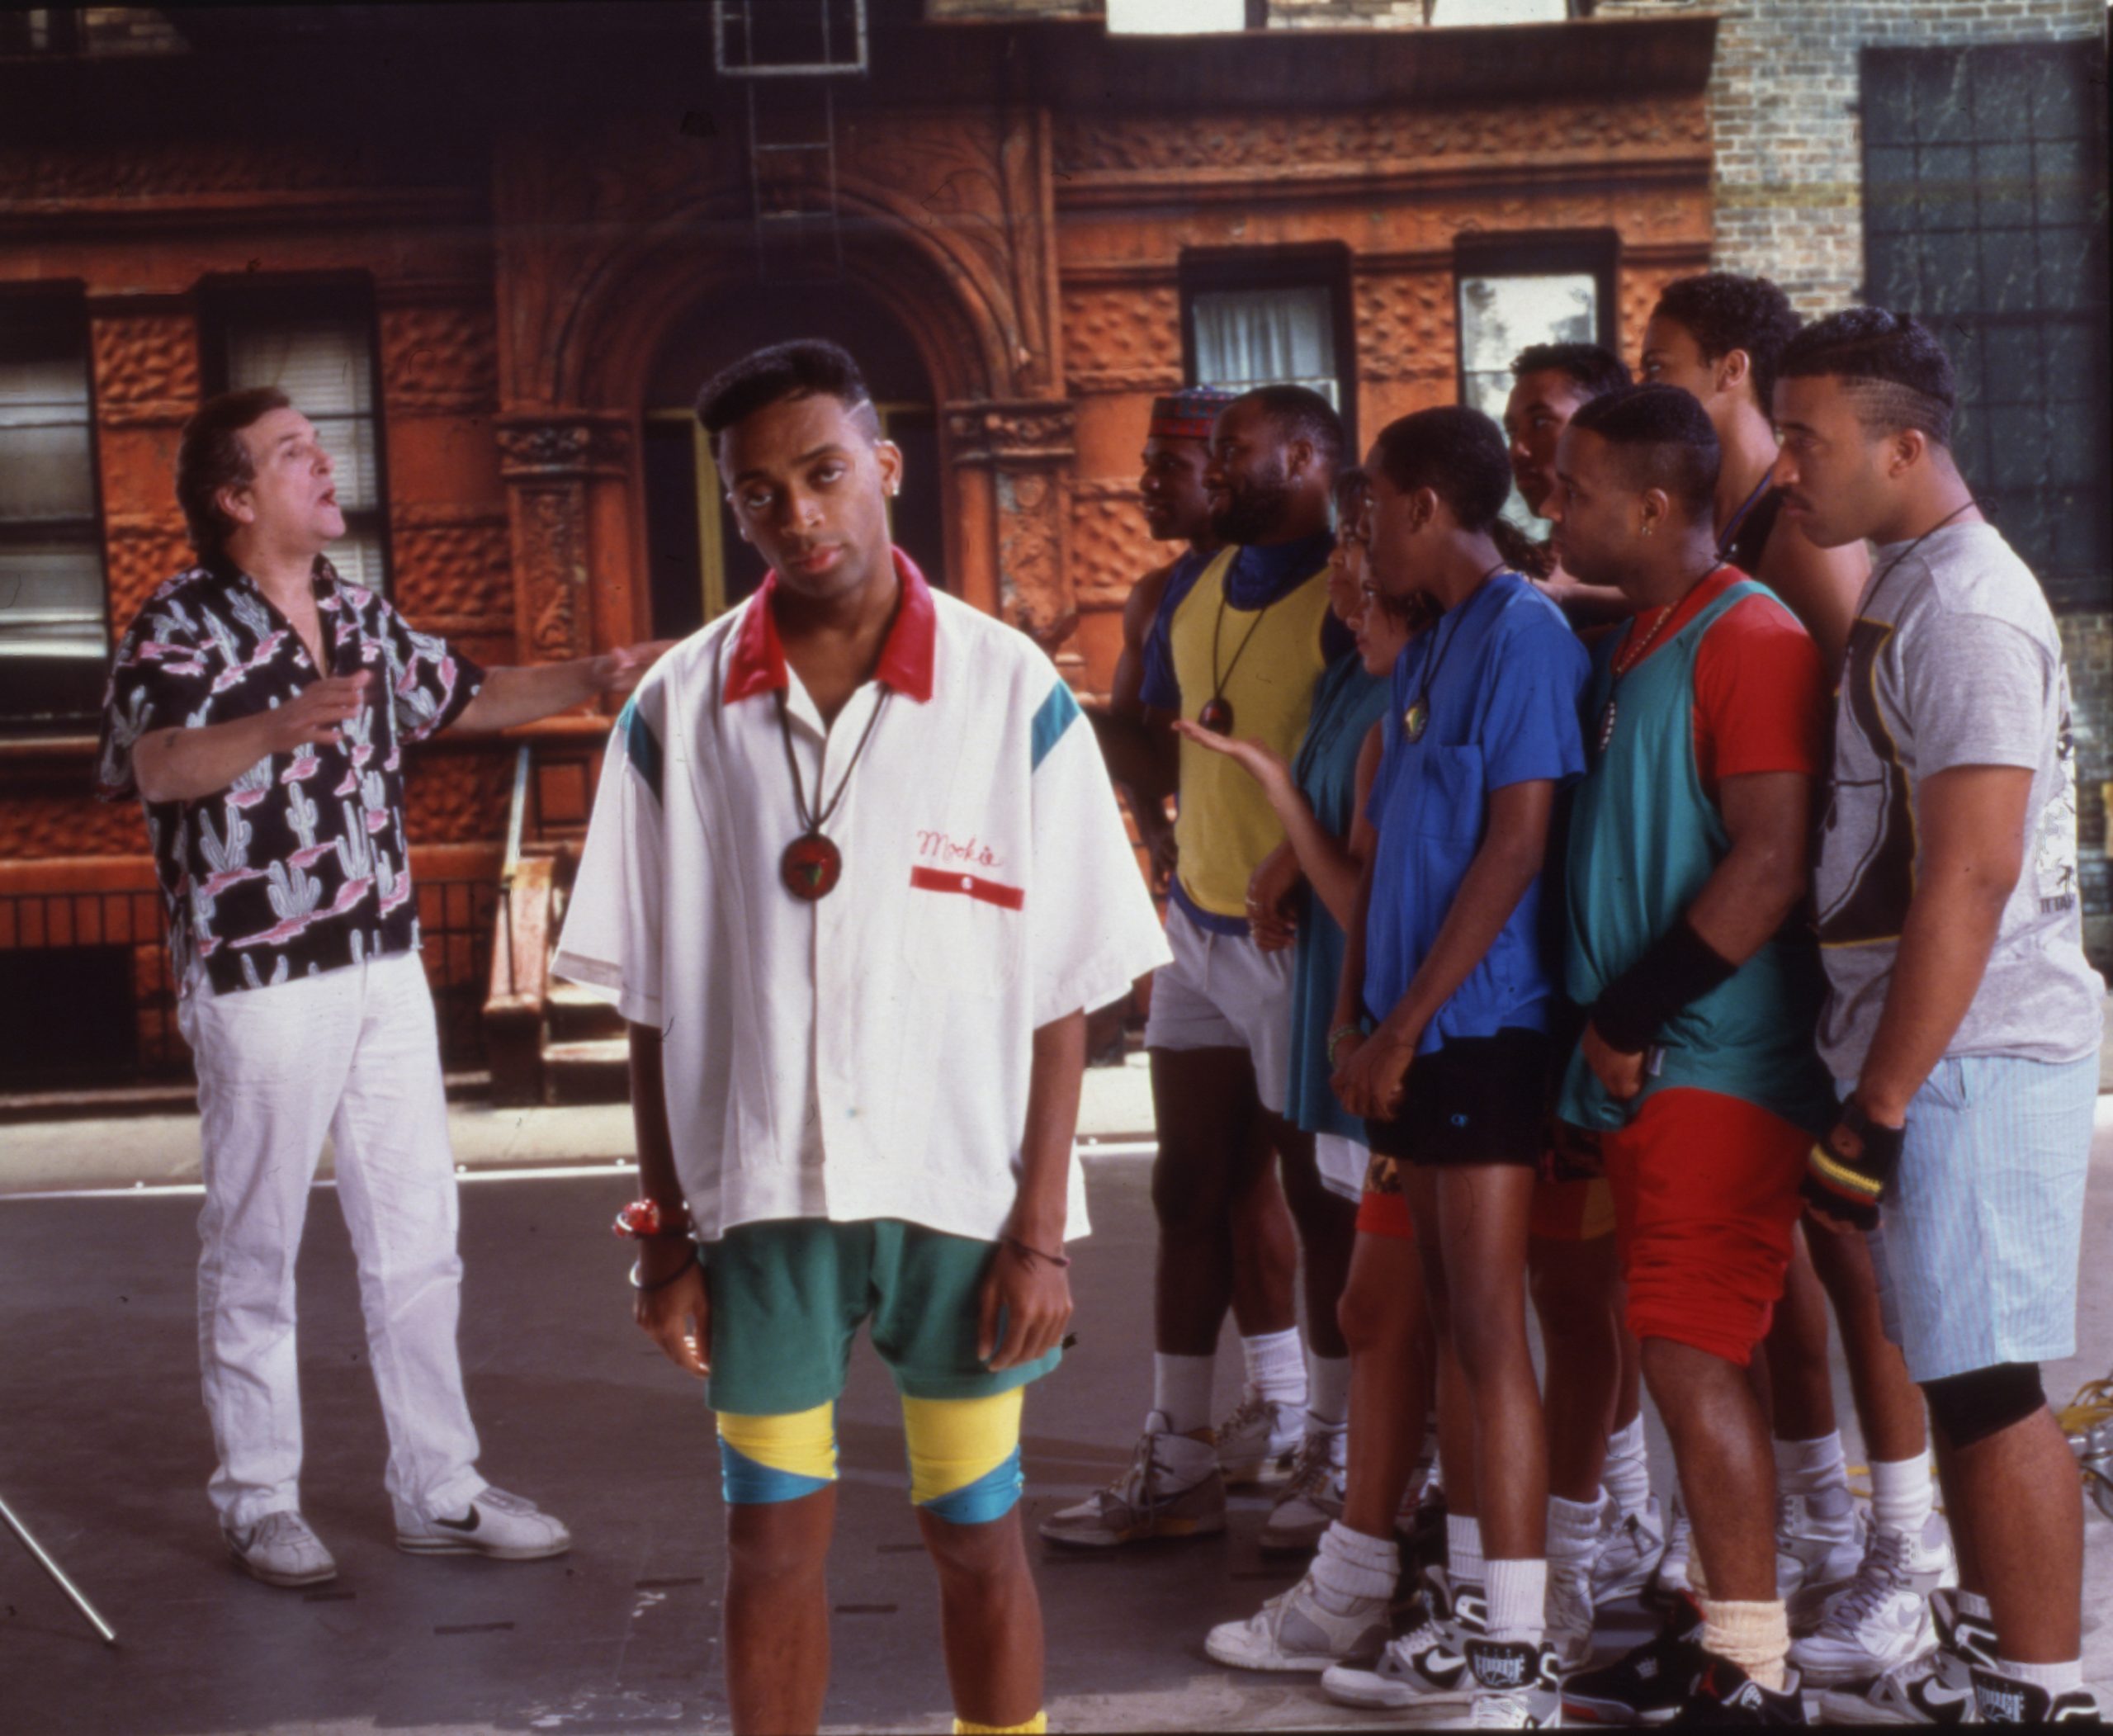 spike-lee-do-the-right-thing